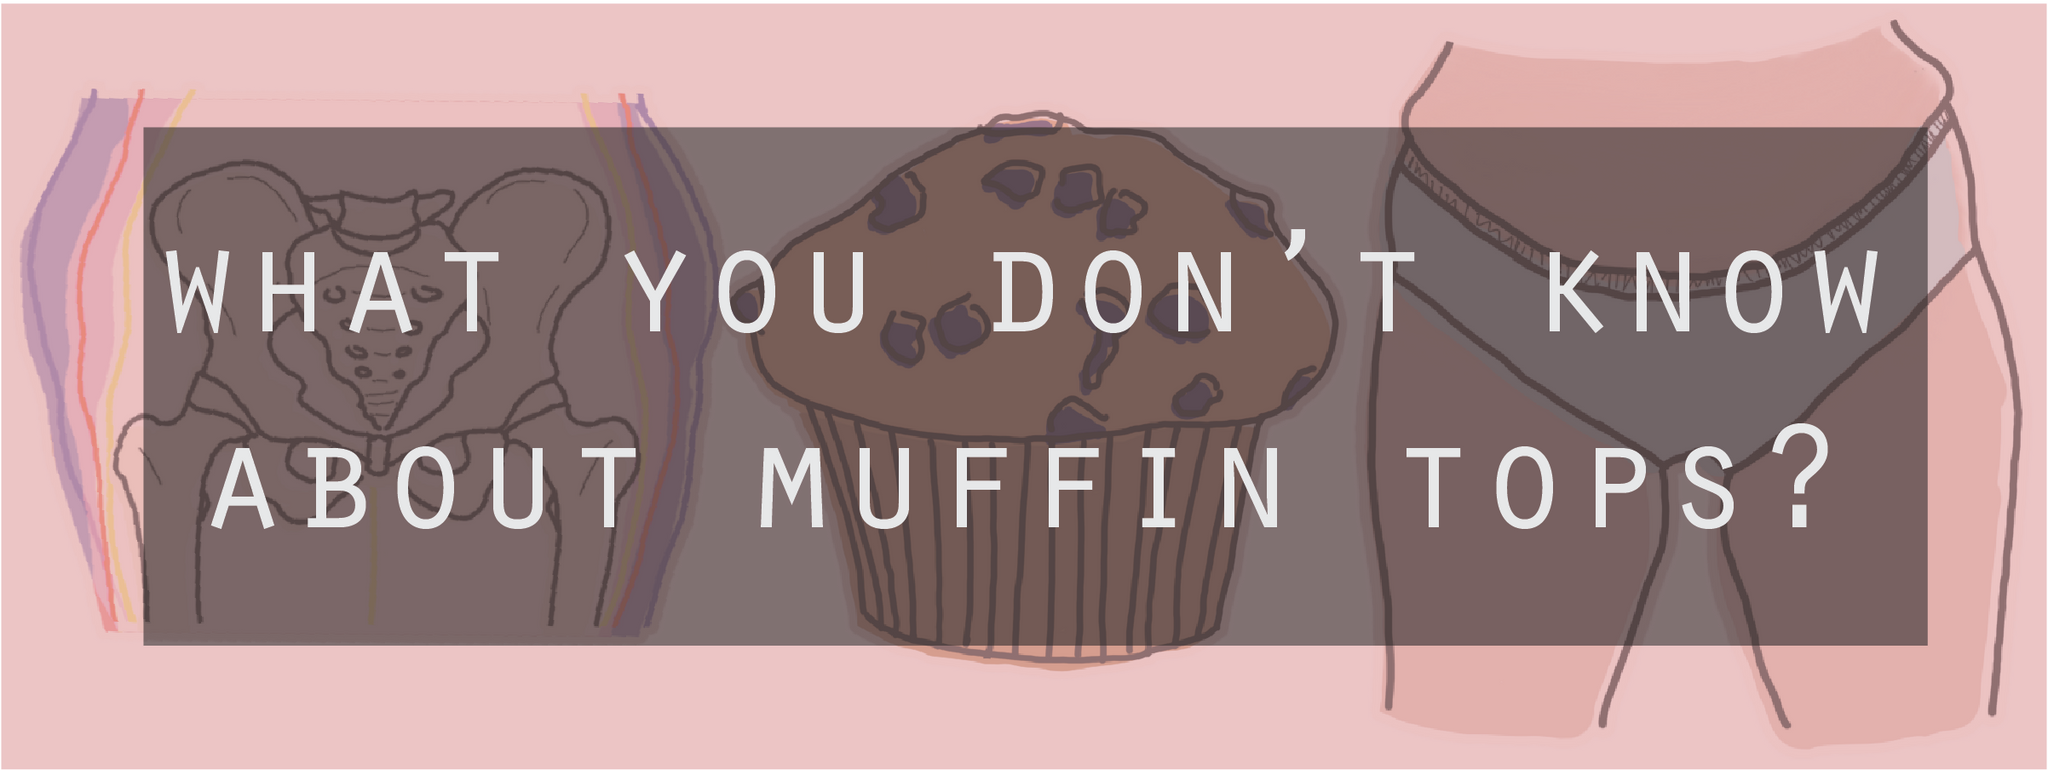 What you don't know about your muffin top - Kade & Vos